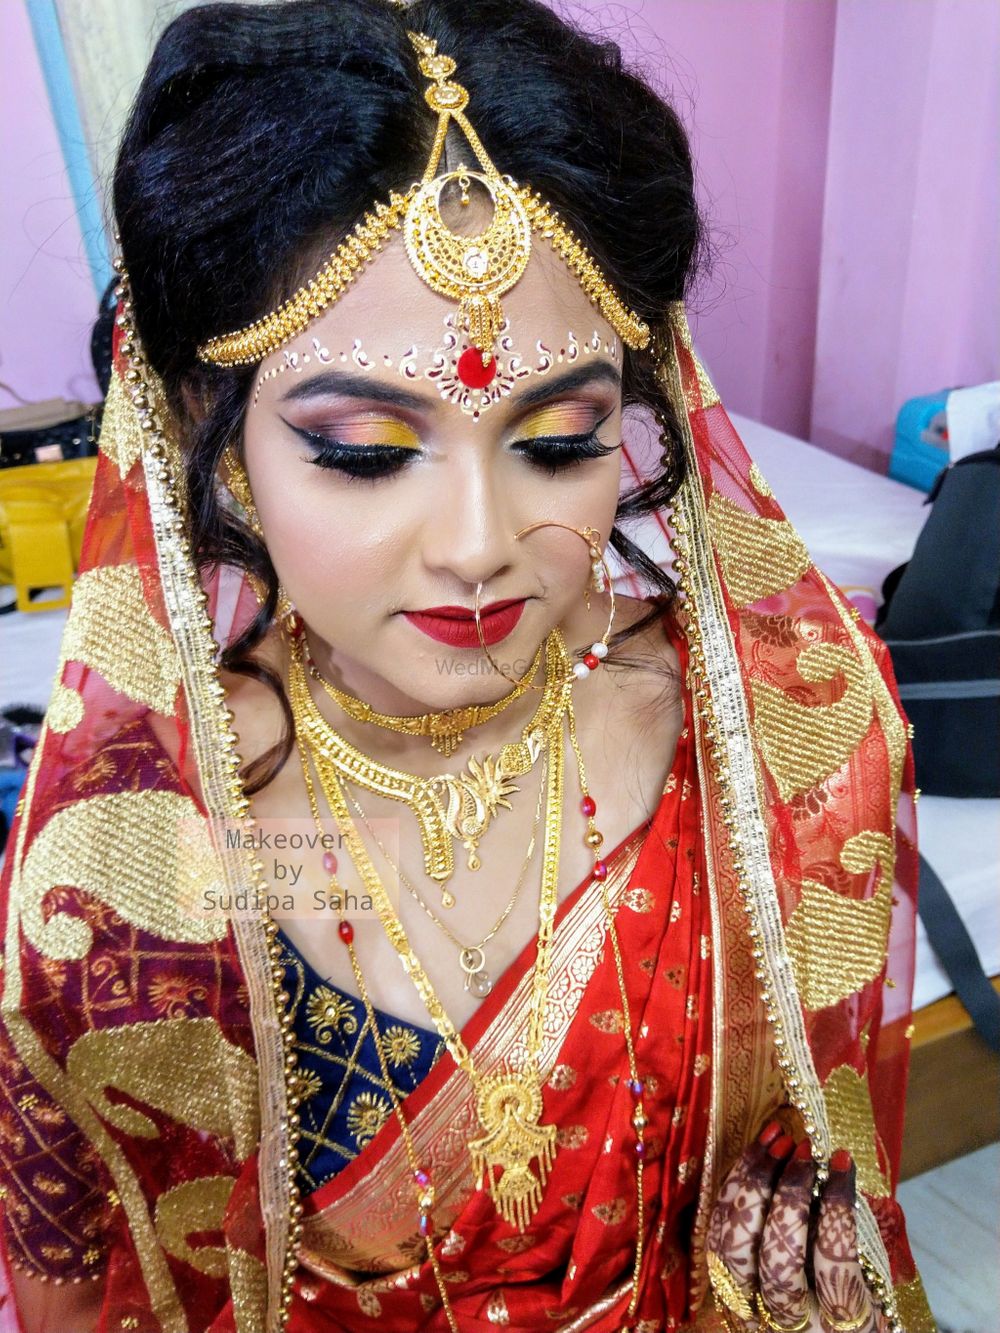 Photo From My lovely Brides - By Makeover By Sudipa Kolkata